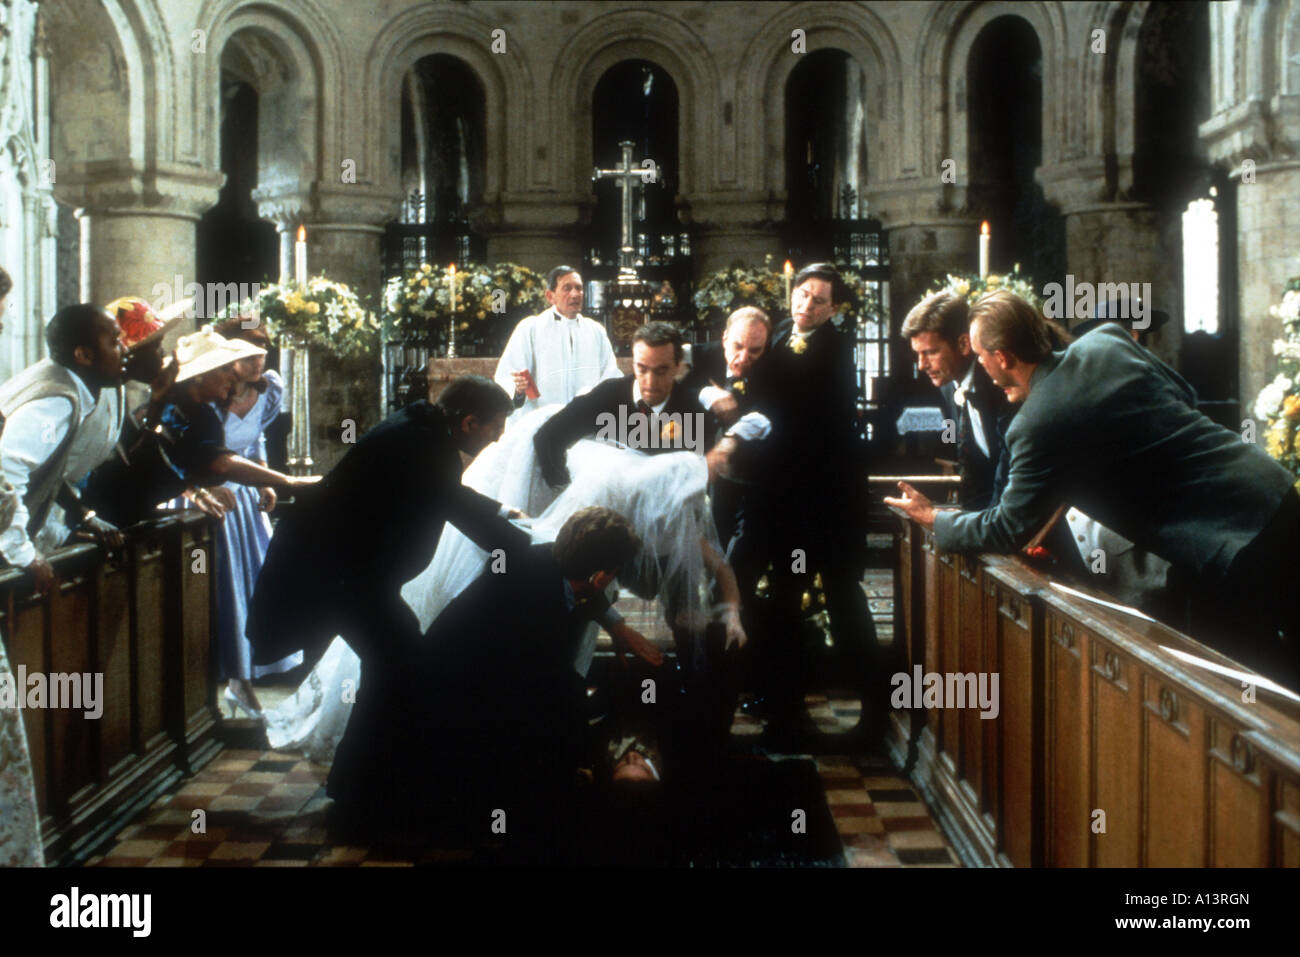 Four Weddings And A Funeral Year 1994 Director Mike Newell Stock Photo